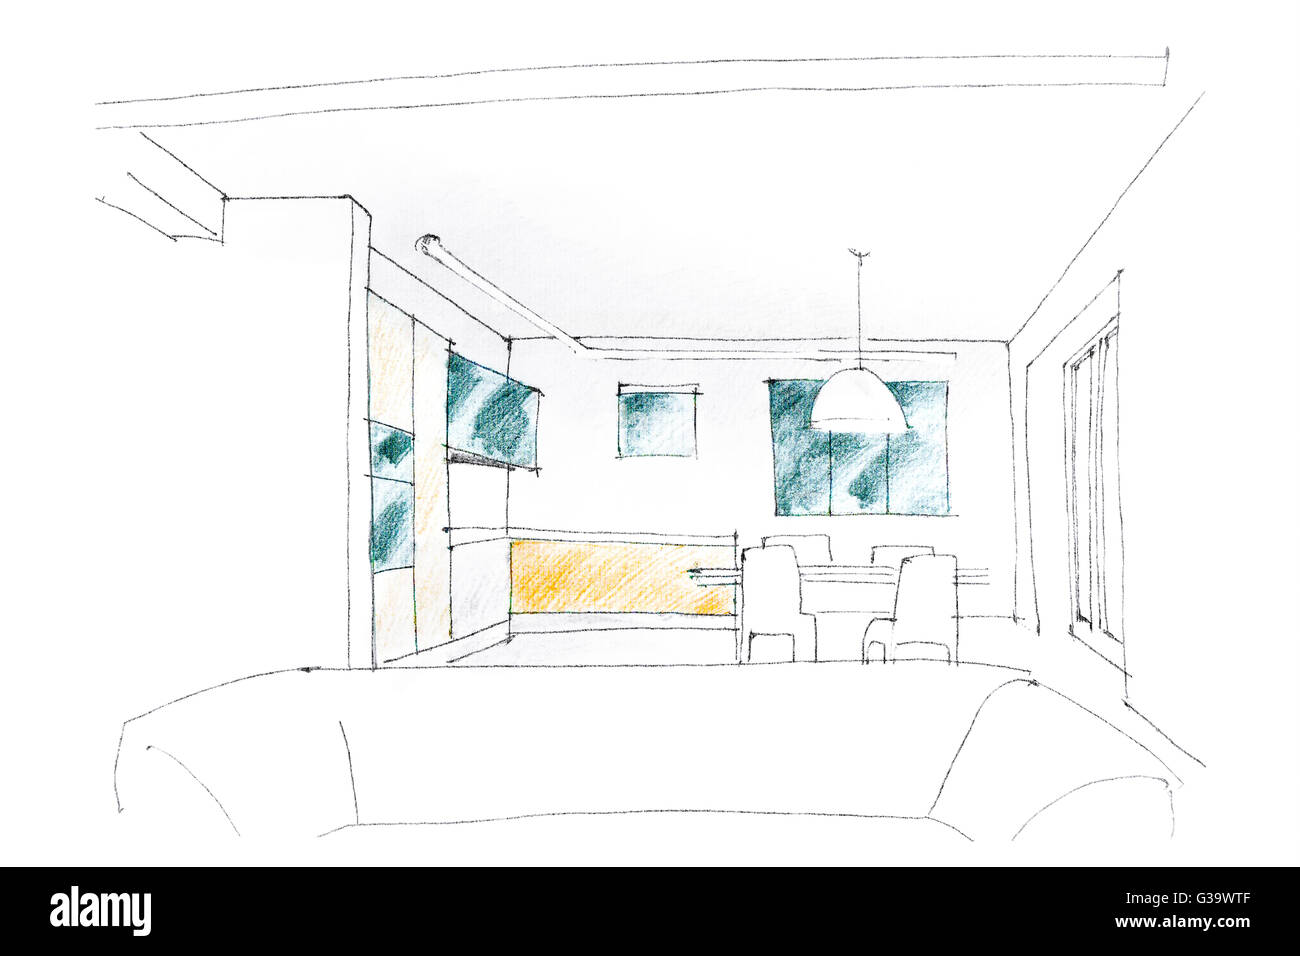 graphical sketch by pencil of an interior living room Stock Photo - Alamy